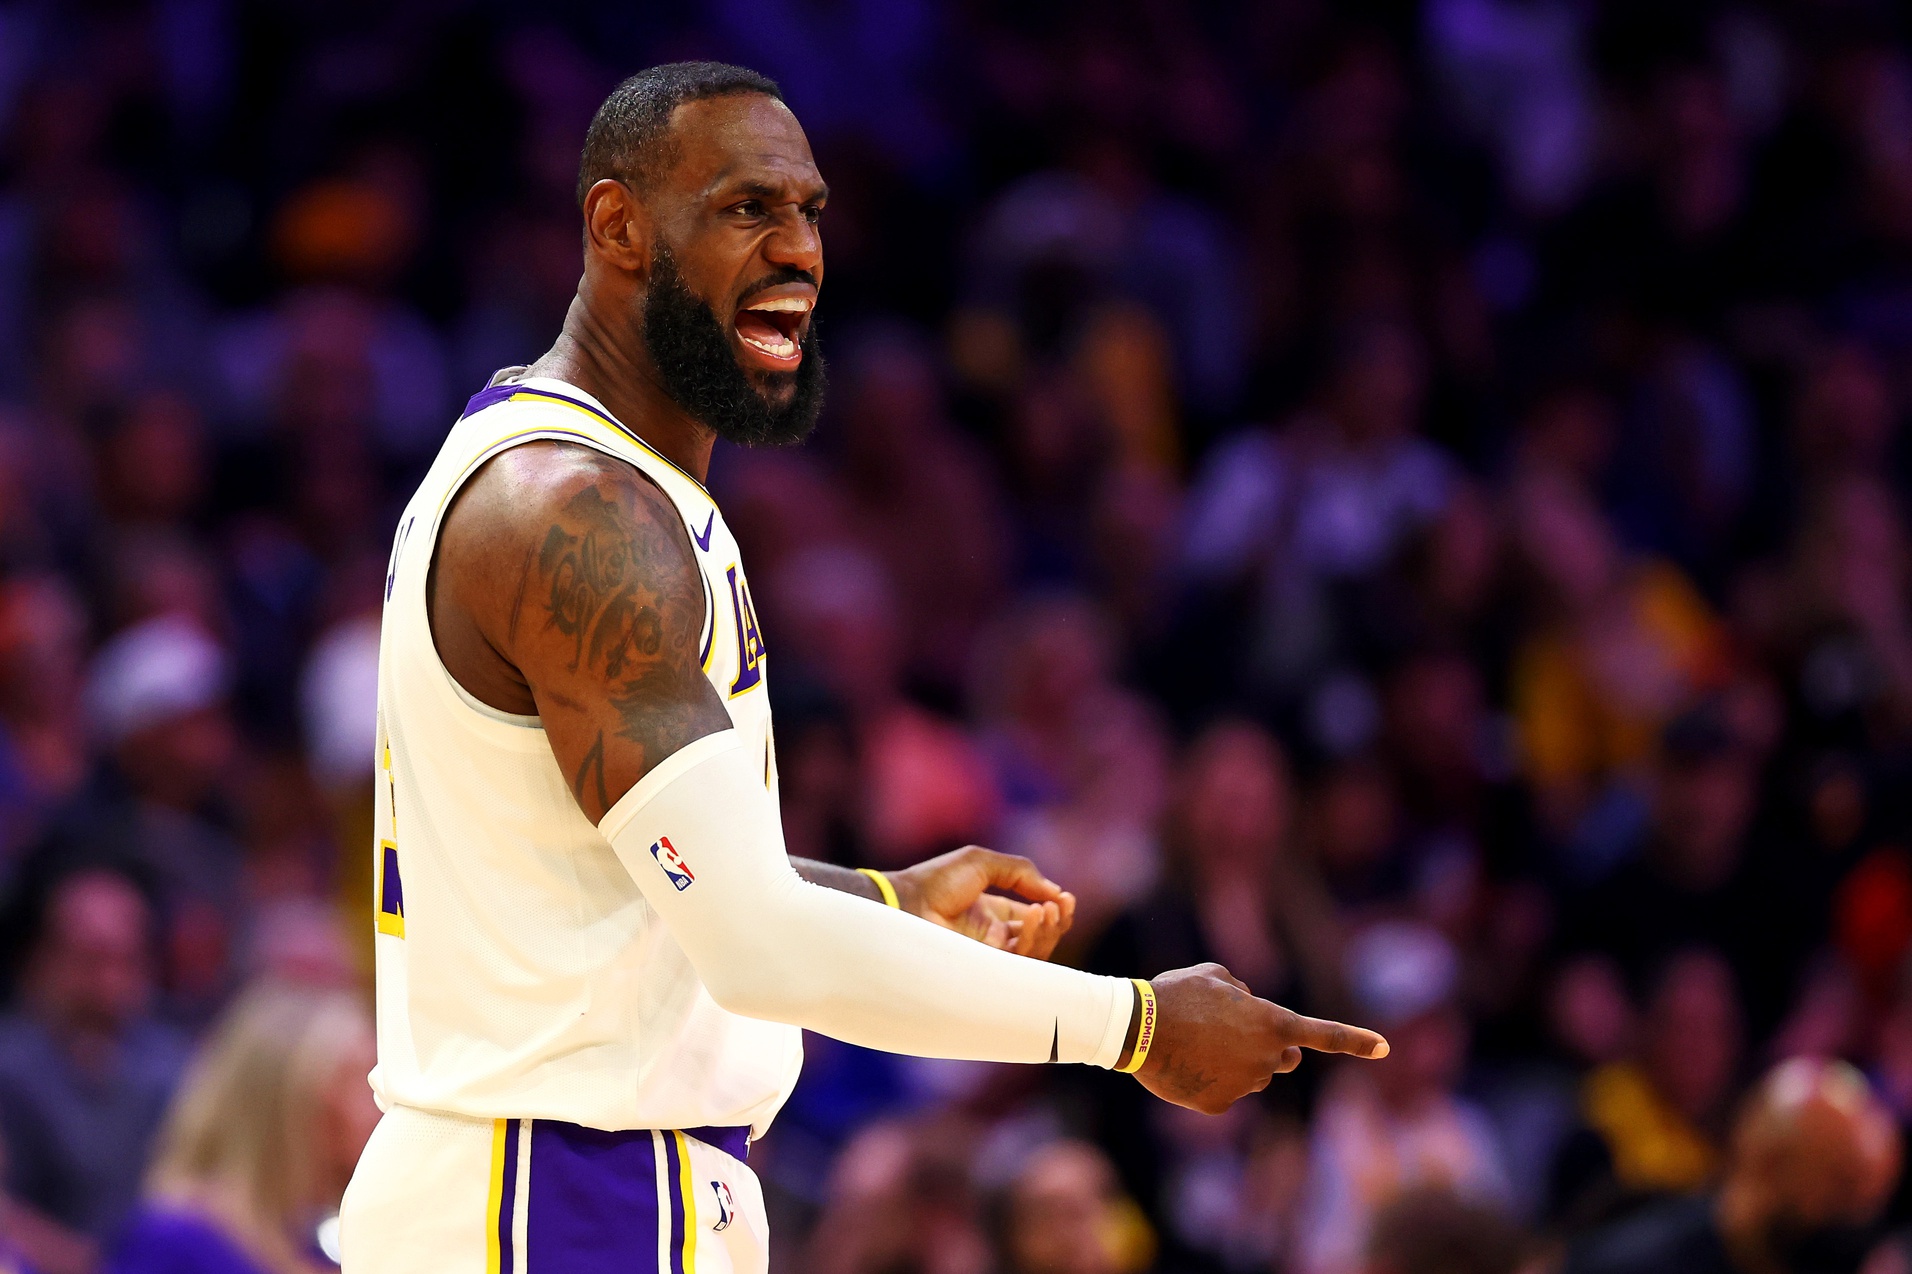 Los Angeles Lakers forward LeBron James (23) reacts after a play during the second quarter of the game against the Phoenix Suns at Footprint Center.